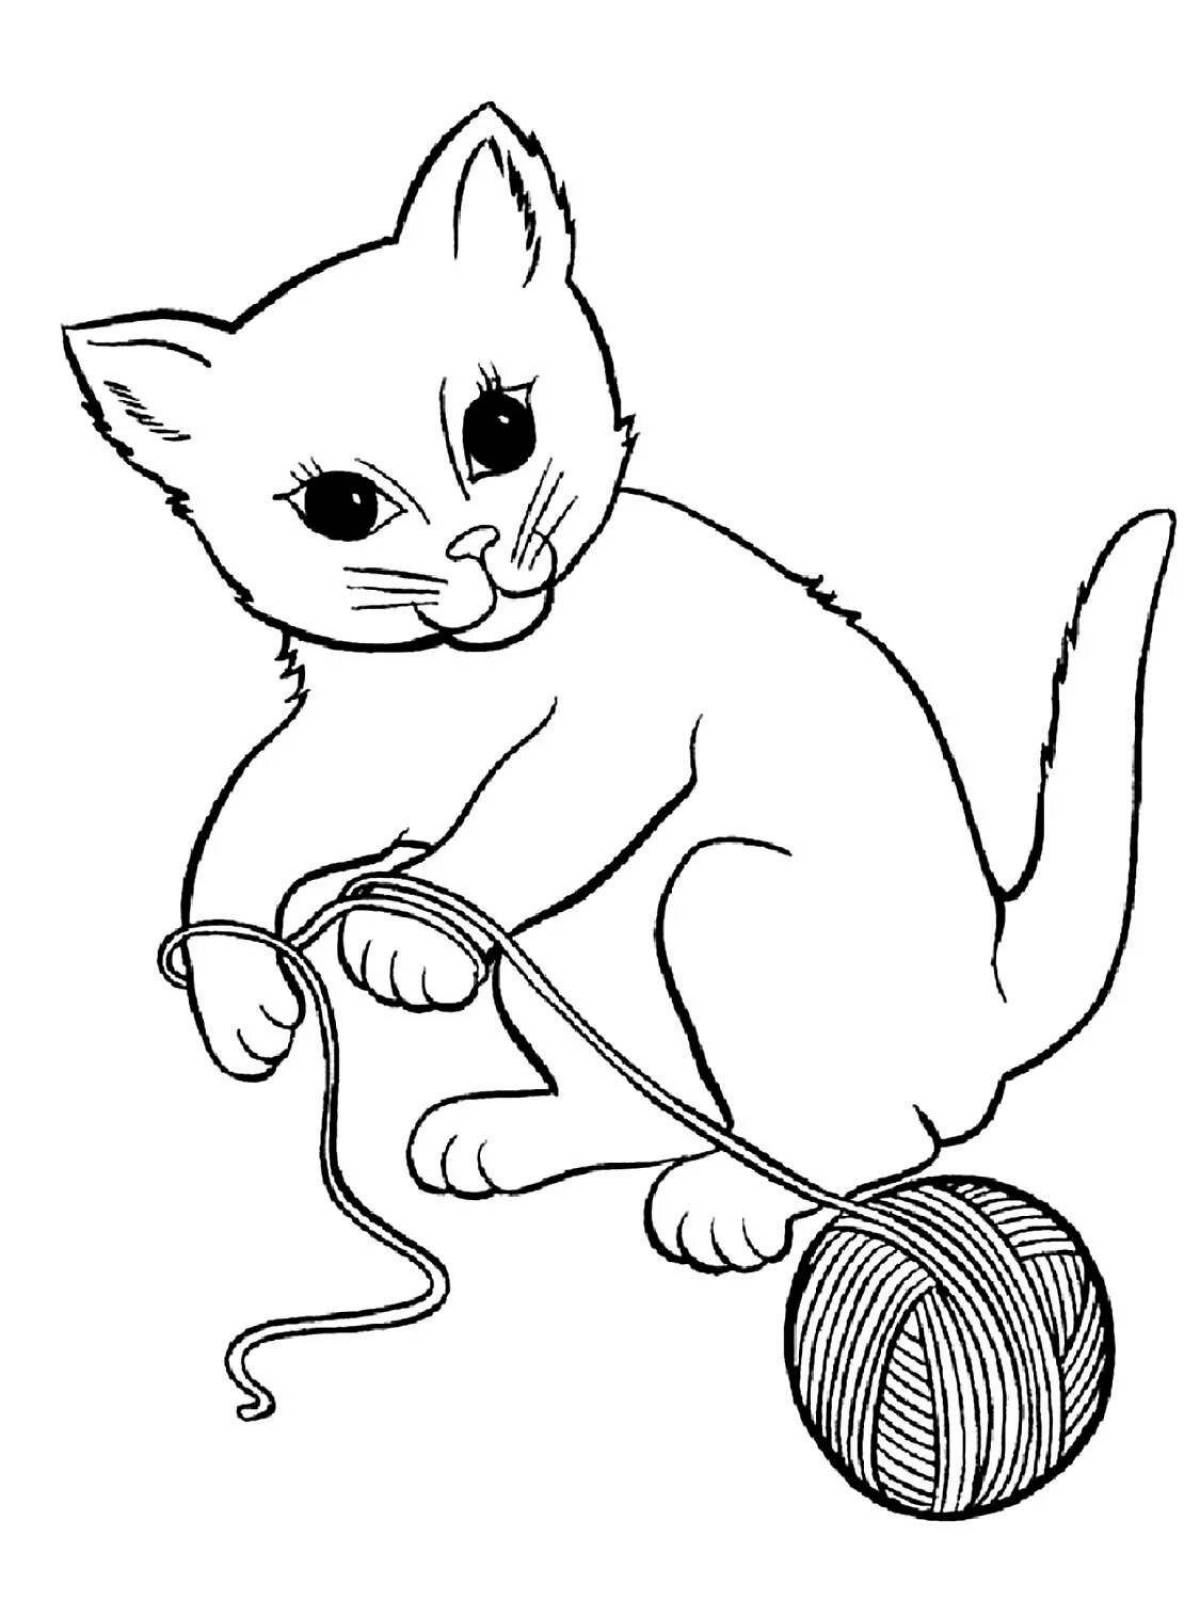 Careful little kitty coloring book